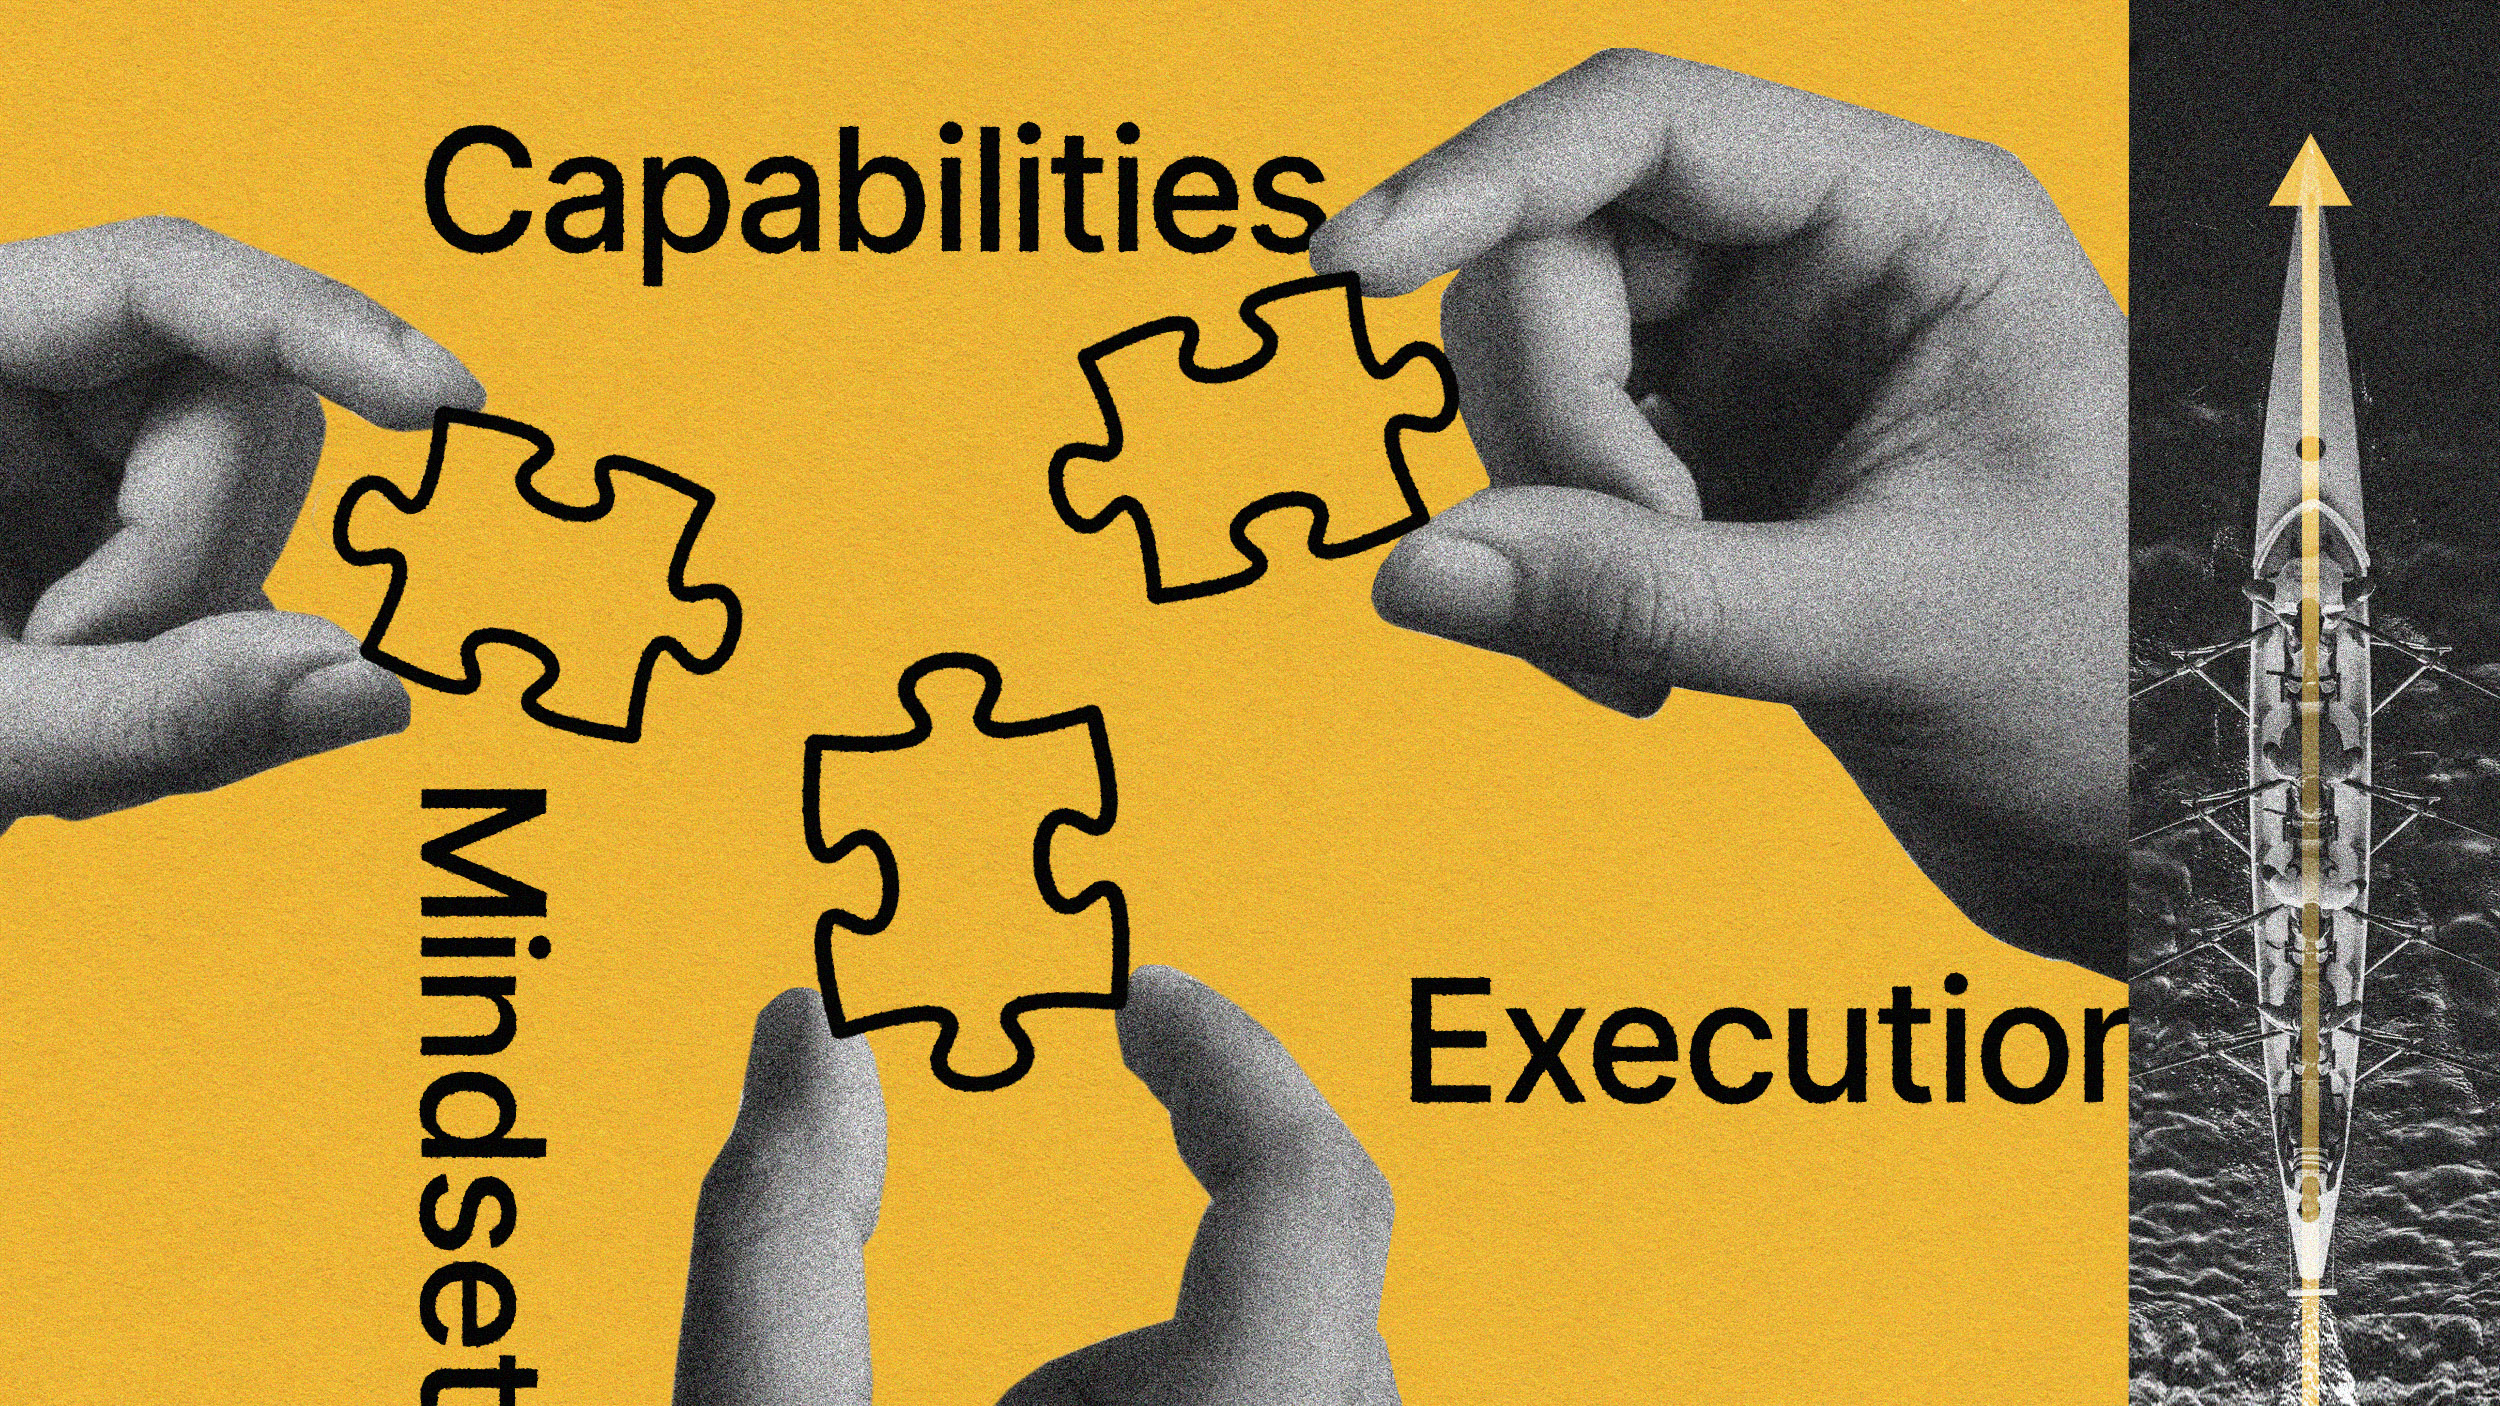 Two hands fitting together puzzle pieces with the words "mindset" and "capabilities", against a backdrop featuring the word "execution" and an image of a rocket launch.